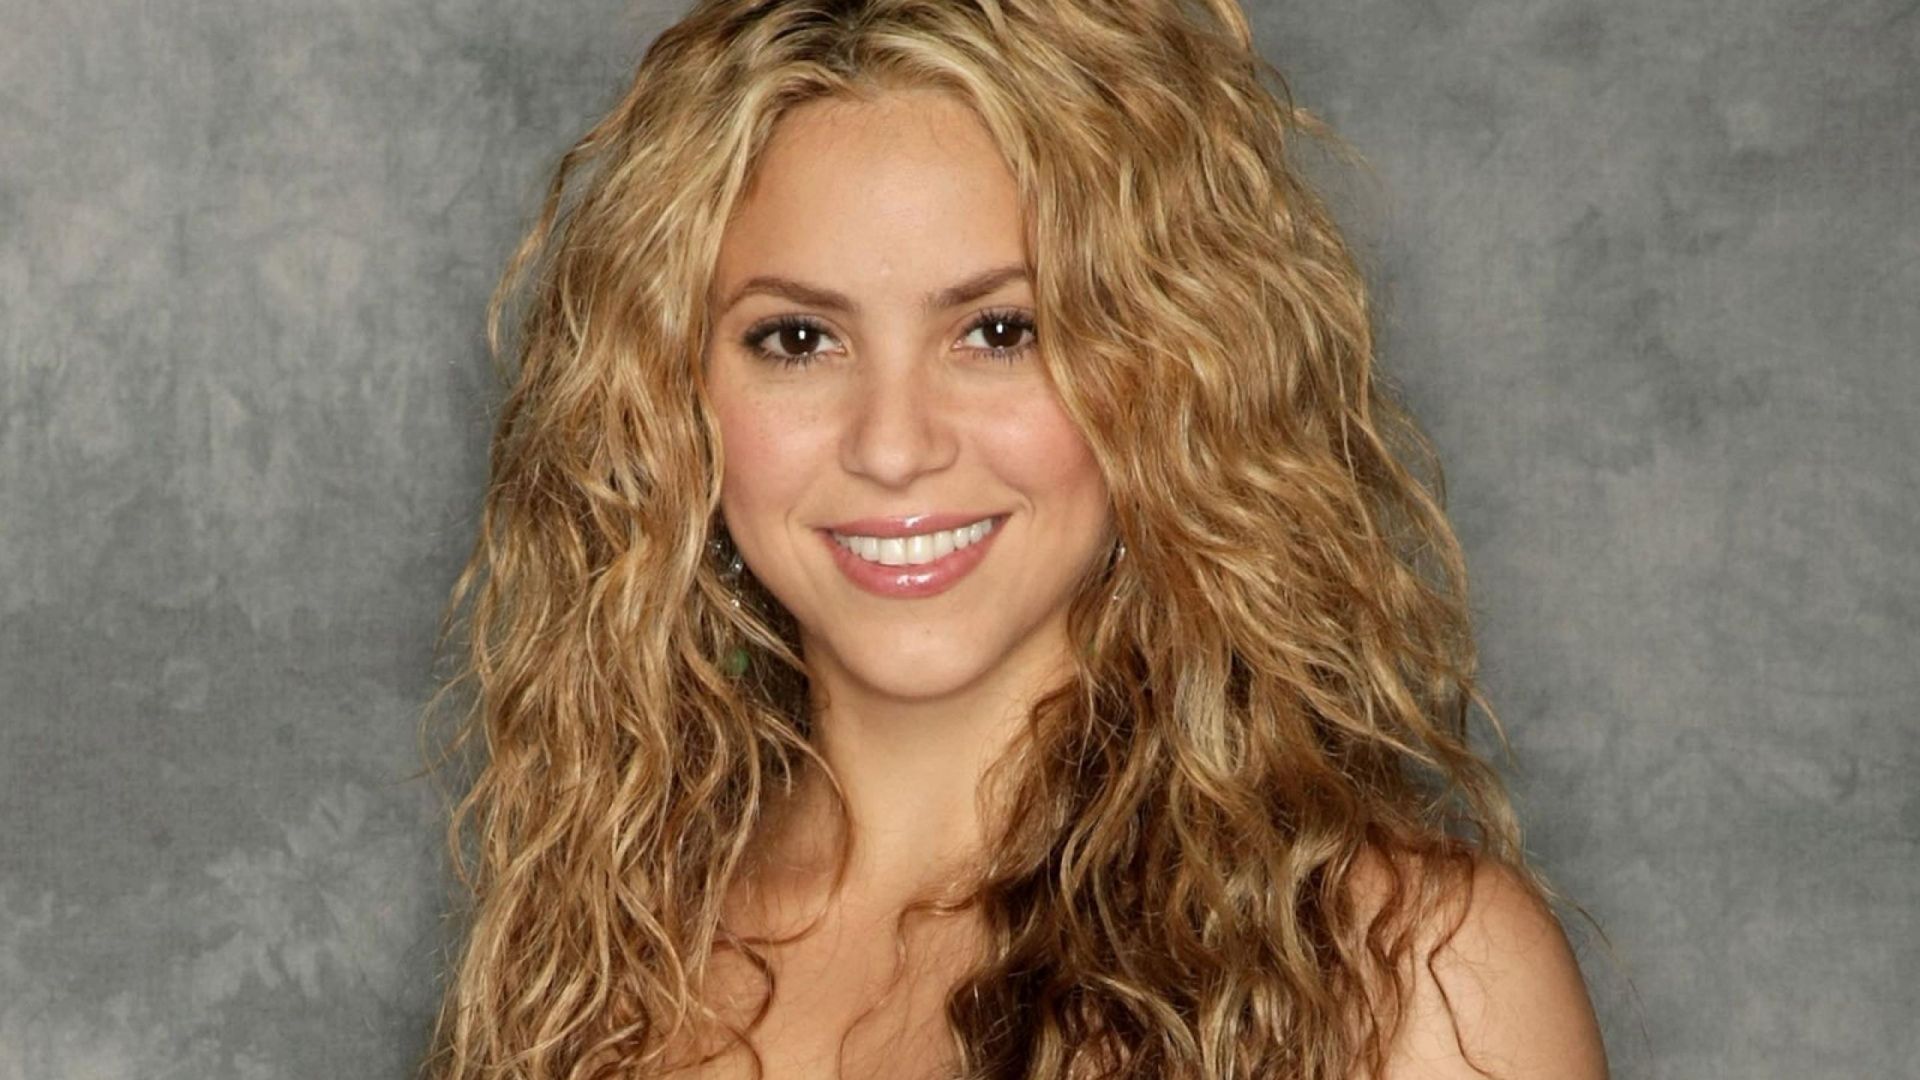 The Top Uses Of Shakira Songs In Movies Or Tv Long Room